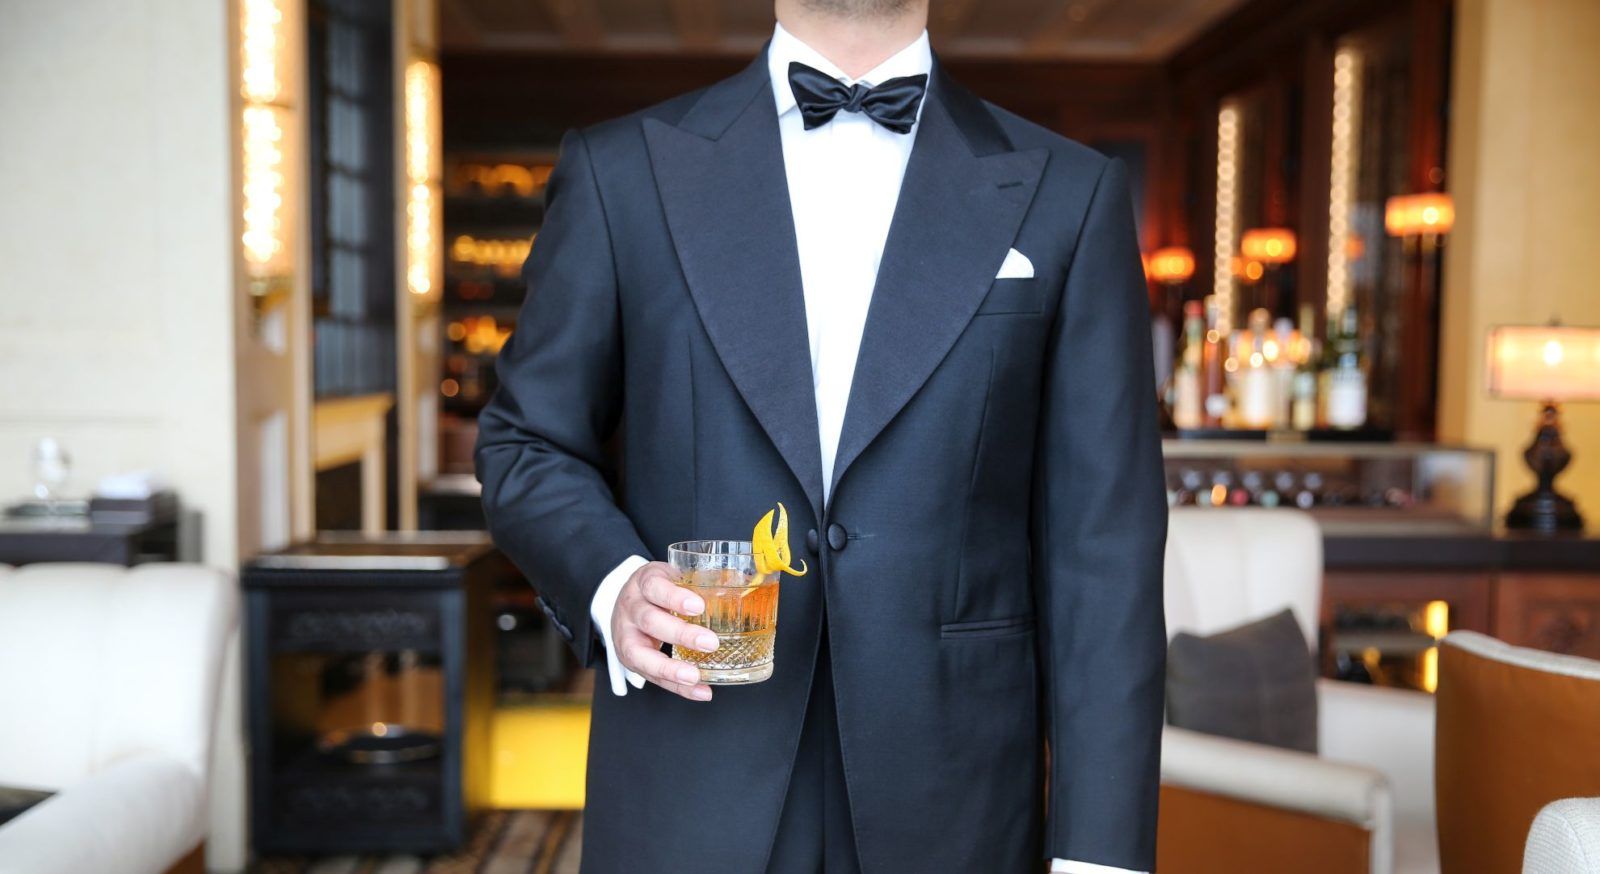 Review: Bespoke barathea dinner suit by W.W. Chan & Sons